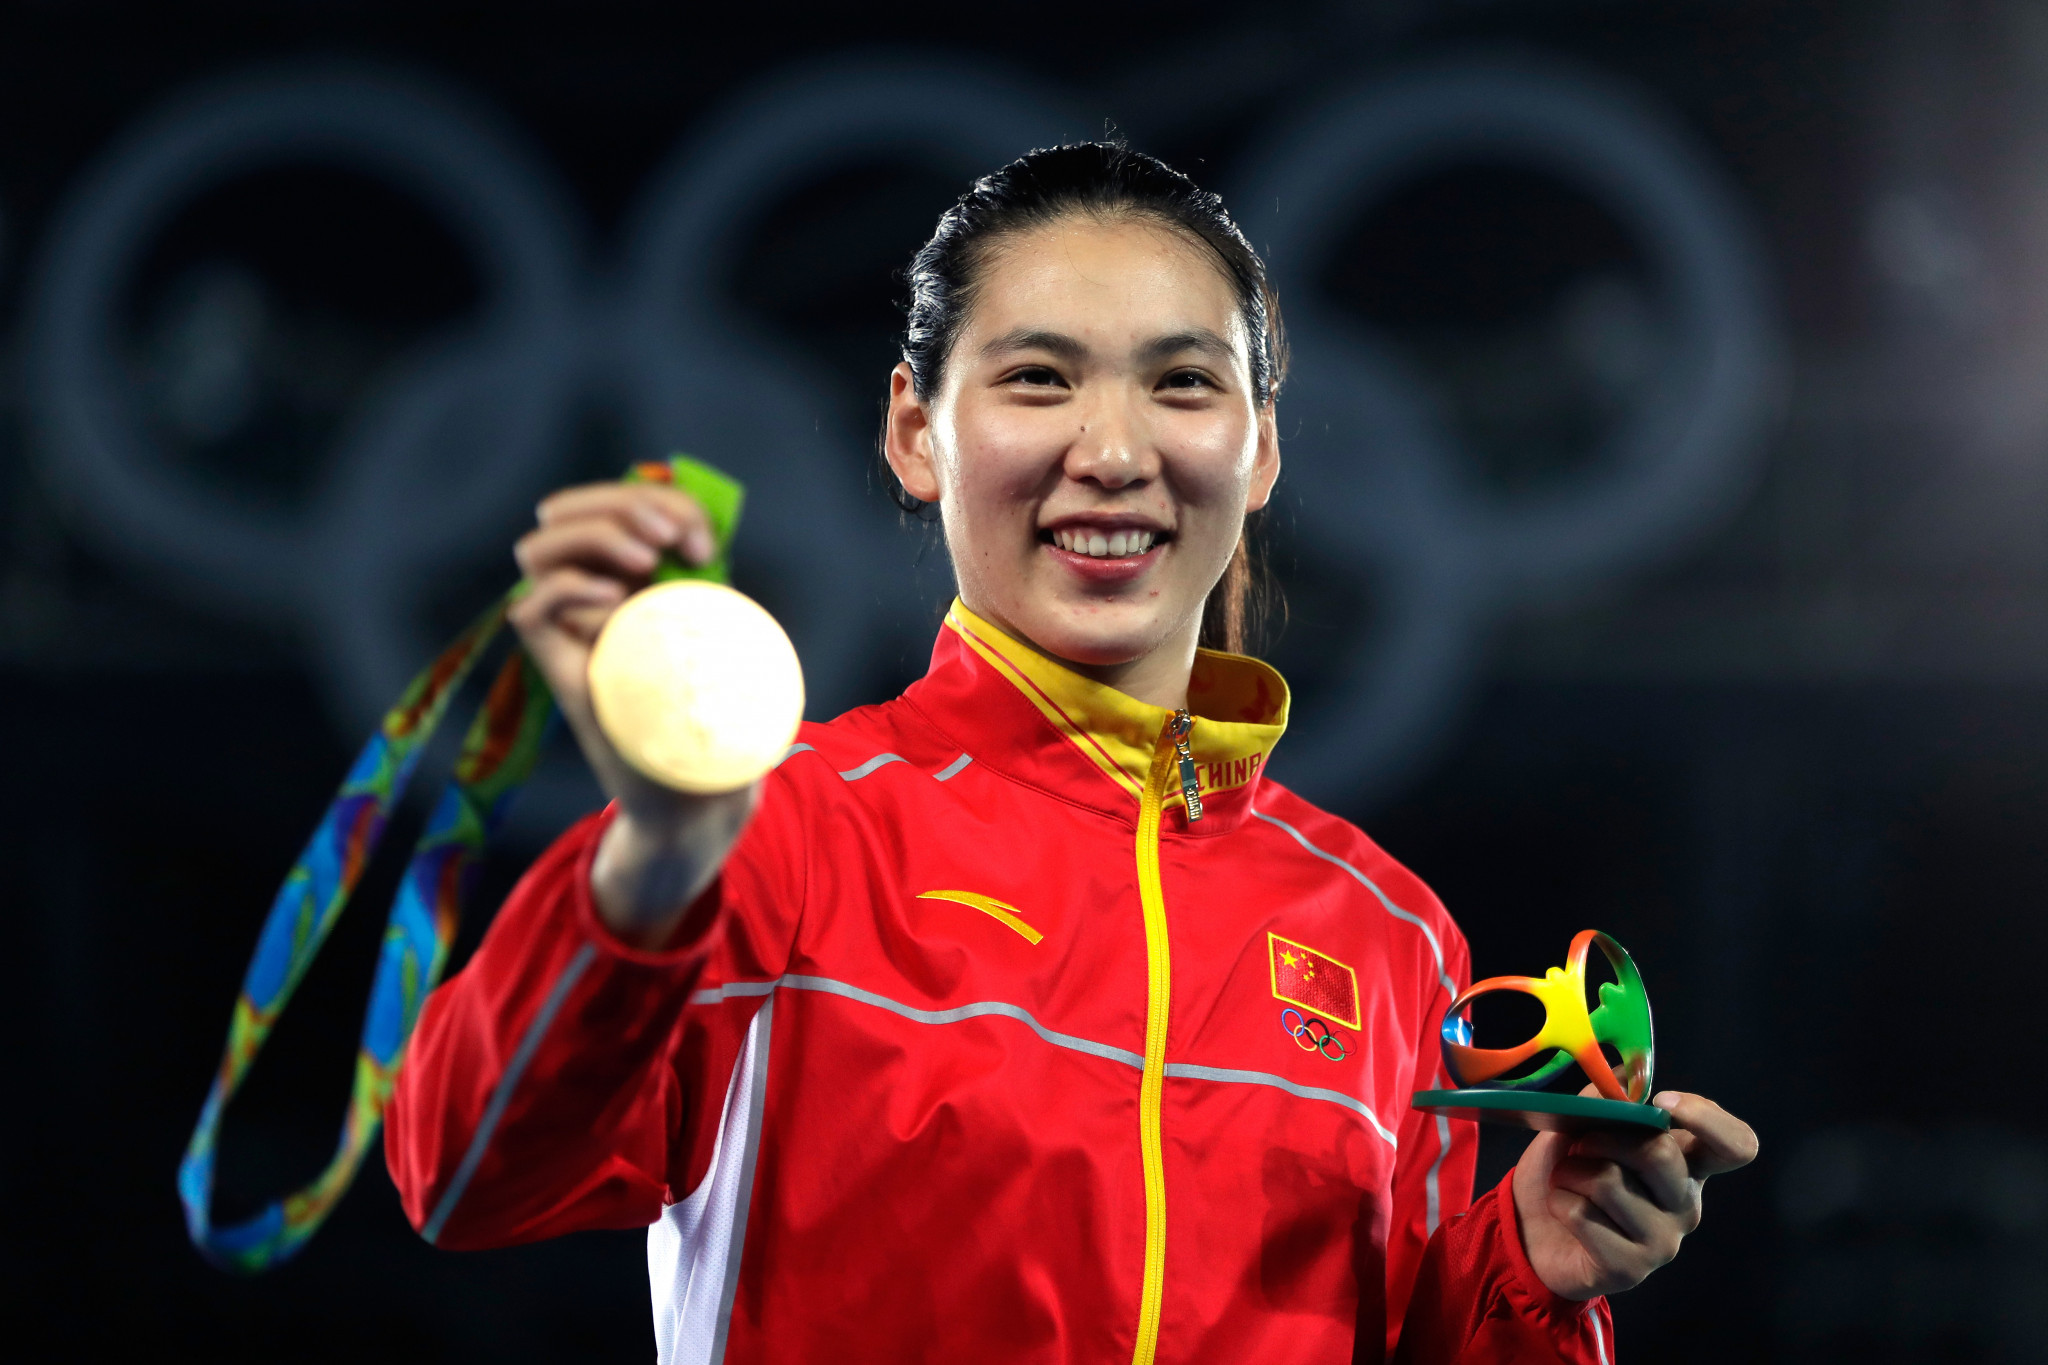 Zheng Shuyin was one of China's Olympic gold medallists in taekwondo at Rio 2016 ©Getty Images